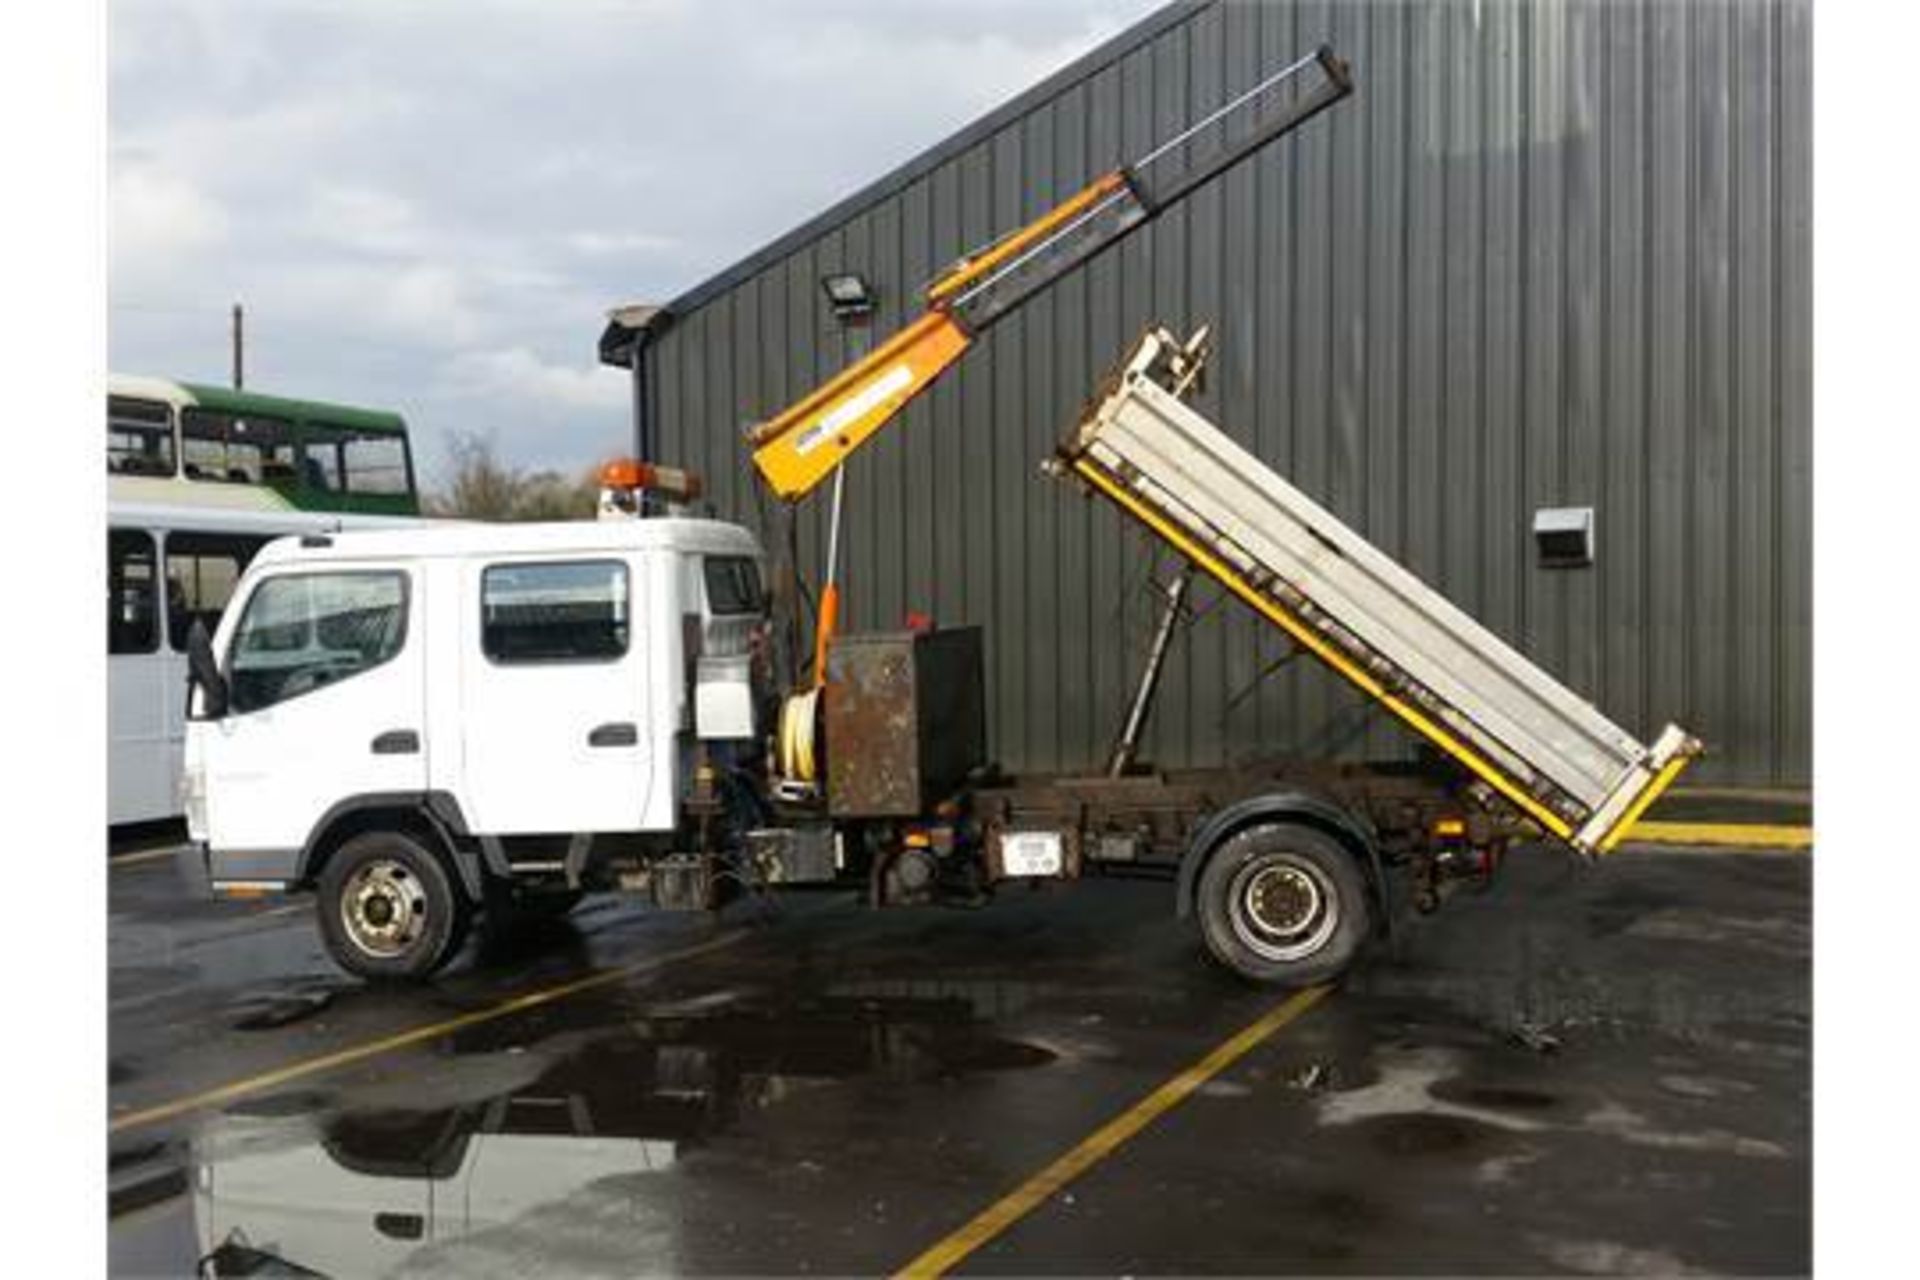 2008 / 57 Mitsubishi Fuso Canter 3 Way Tipper with Compressor and HIAB - Image 2 of 9